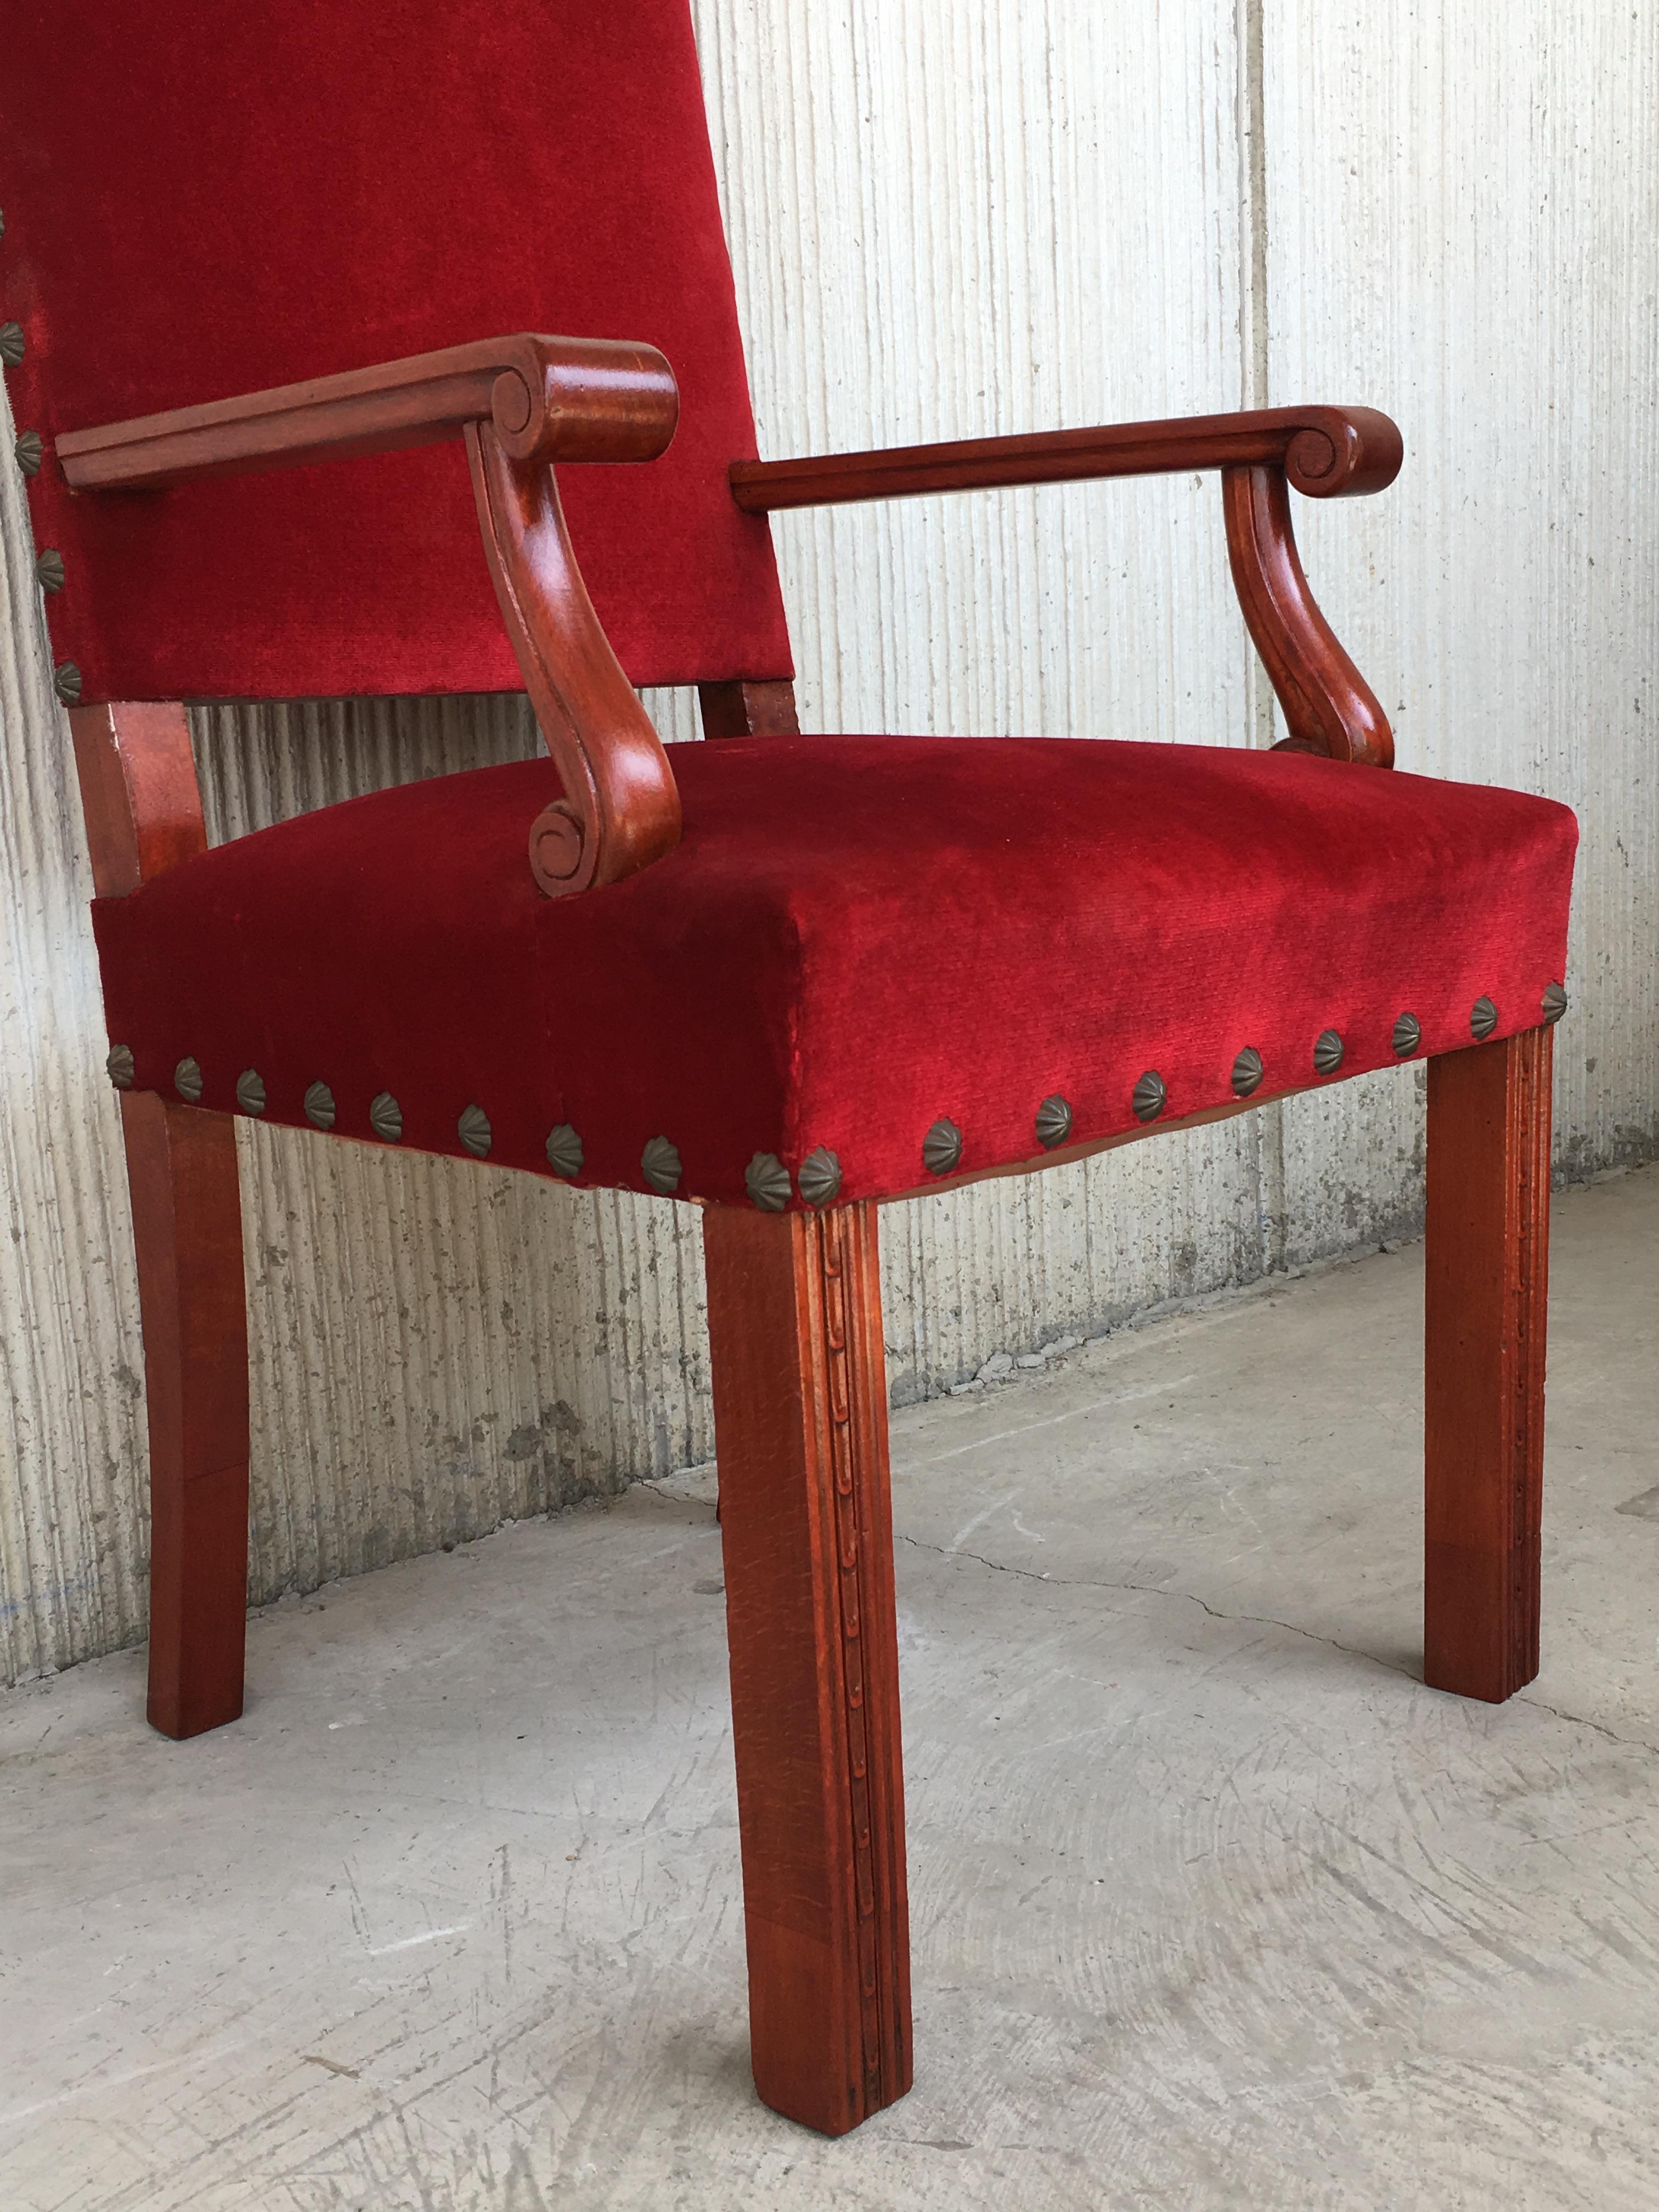 19th Century Spanish Revival High Back Armchair with Red Velvet Upholstery For Sale 2